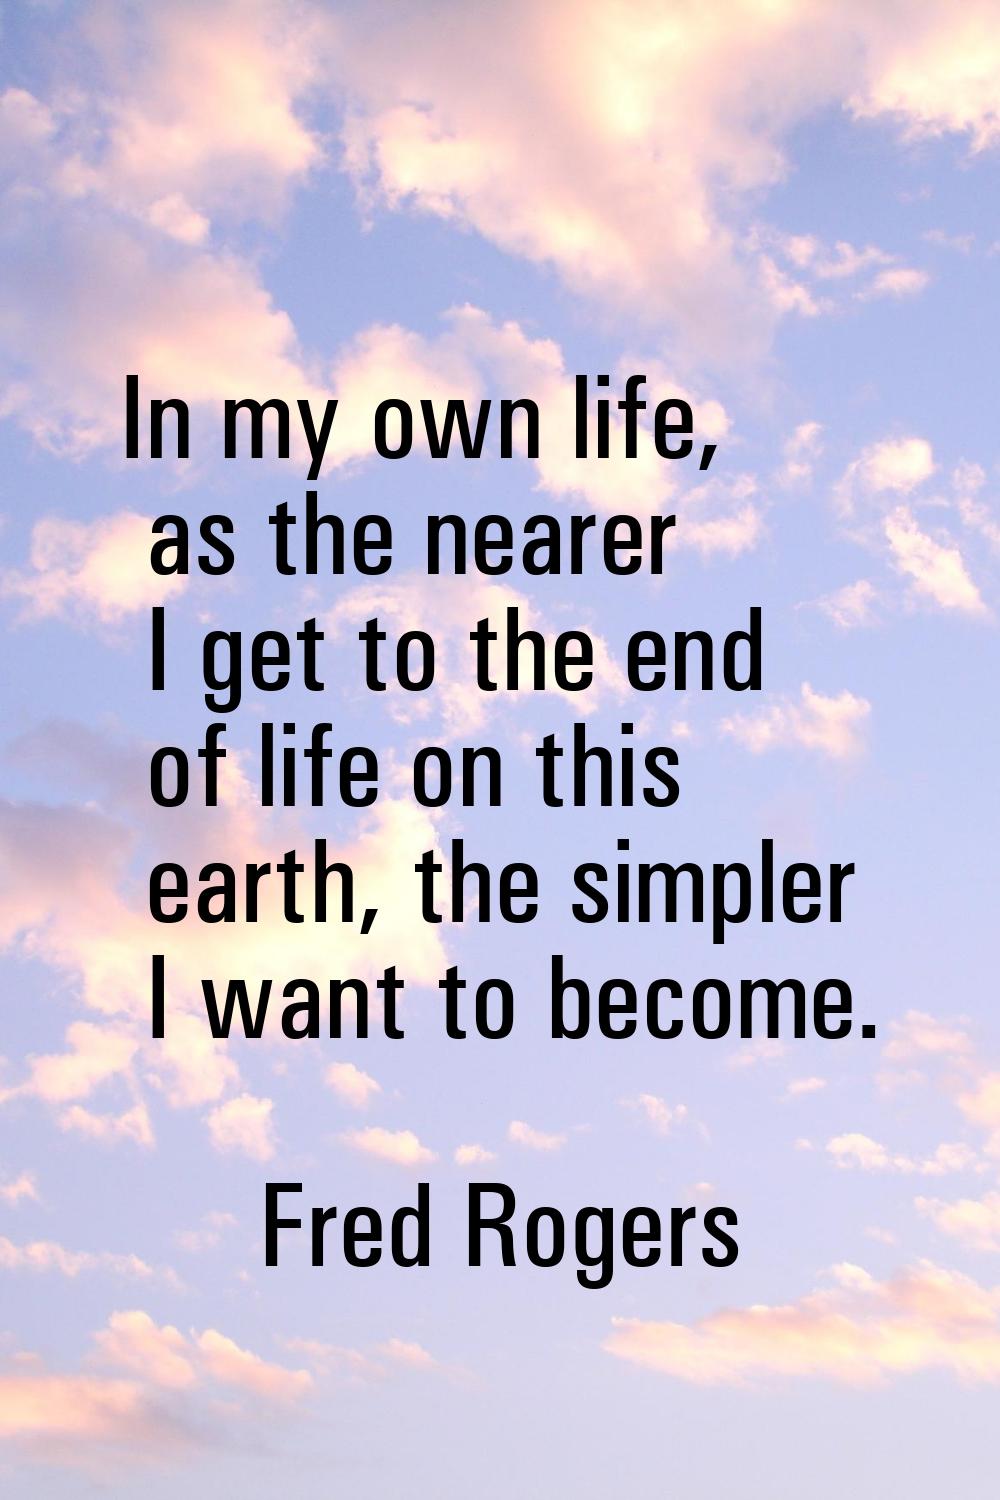 In my own life, as the nearer I get to the end of life on this earth, the simpler I want to become.